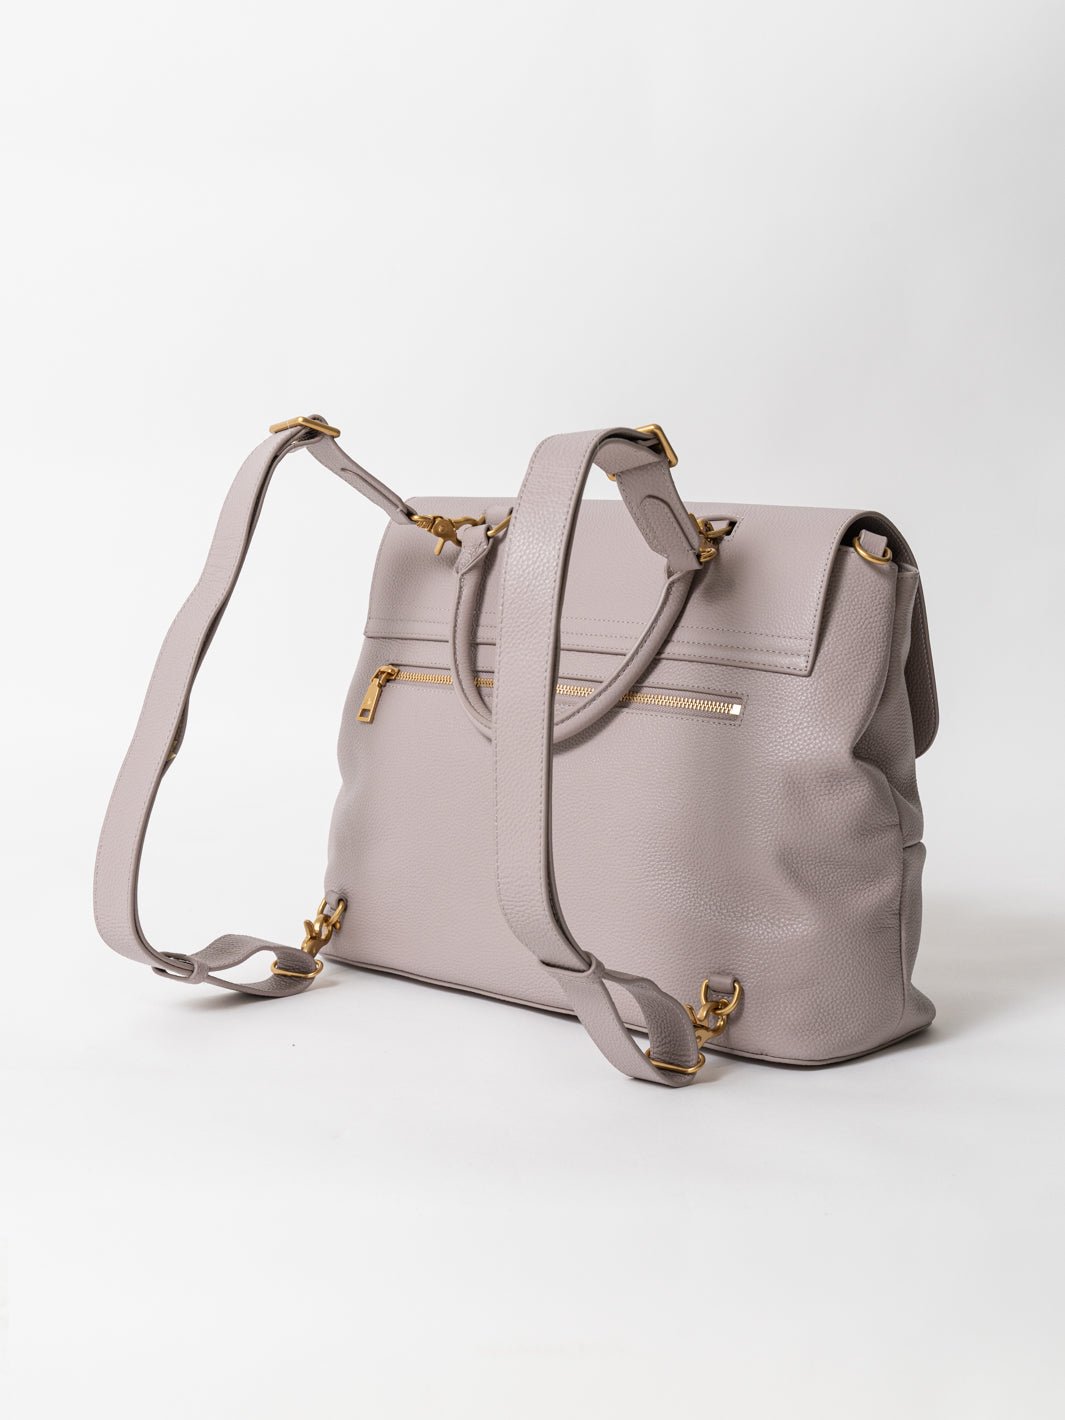 Luxury leather baby bag  Luxe Ari backpack – Alf the Label